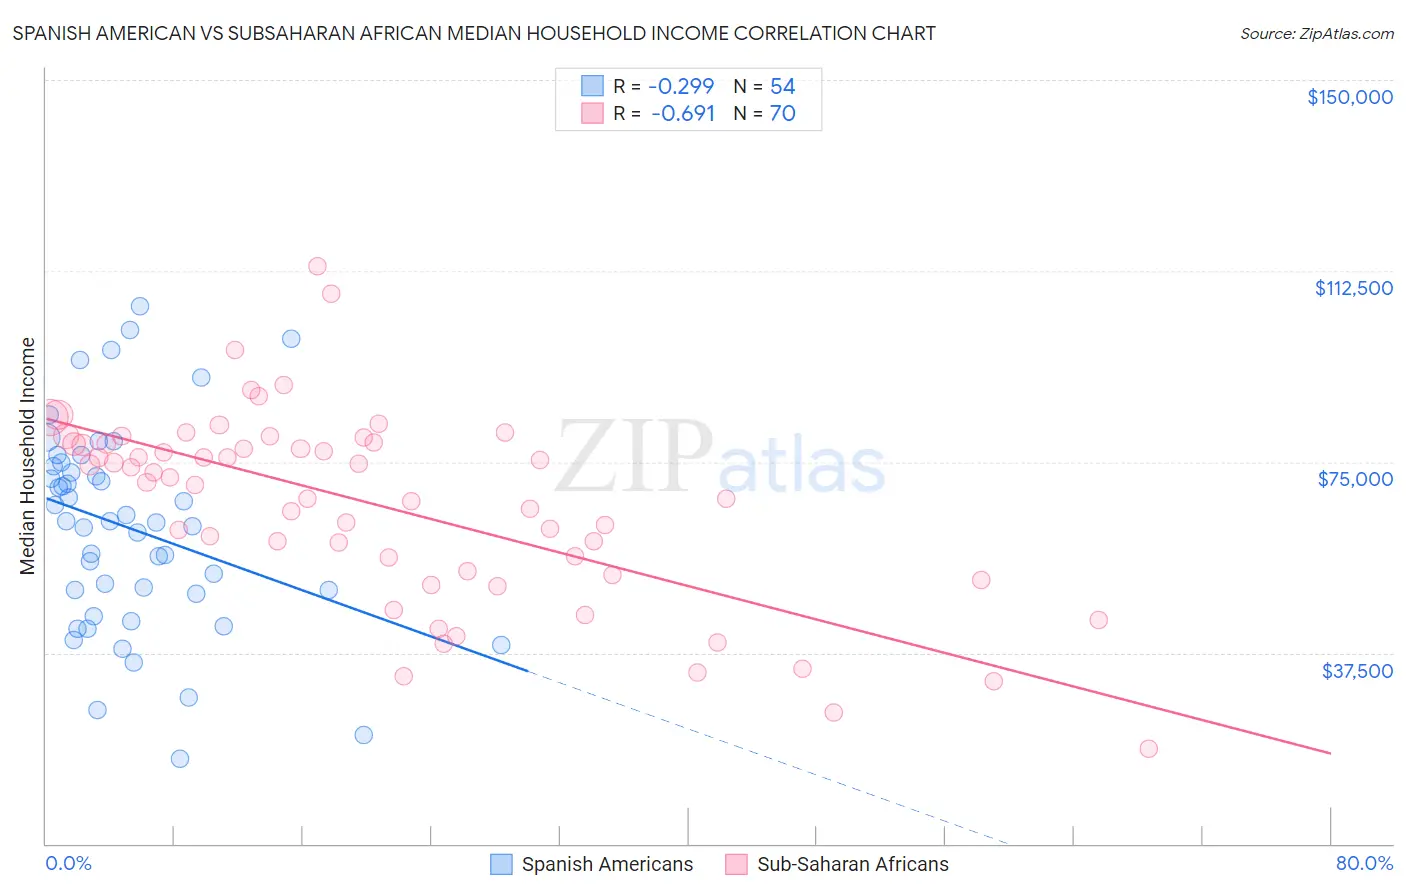 Spanish American vs Subsaharan African Median Household Income